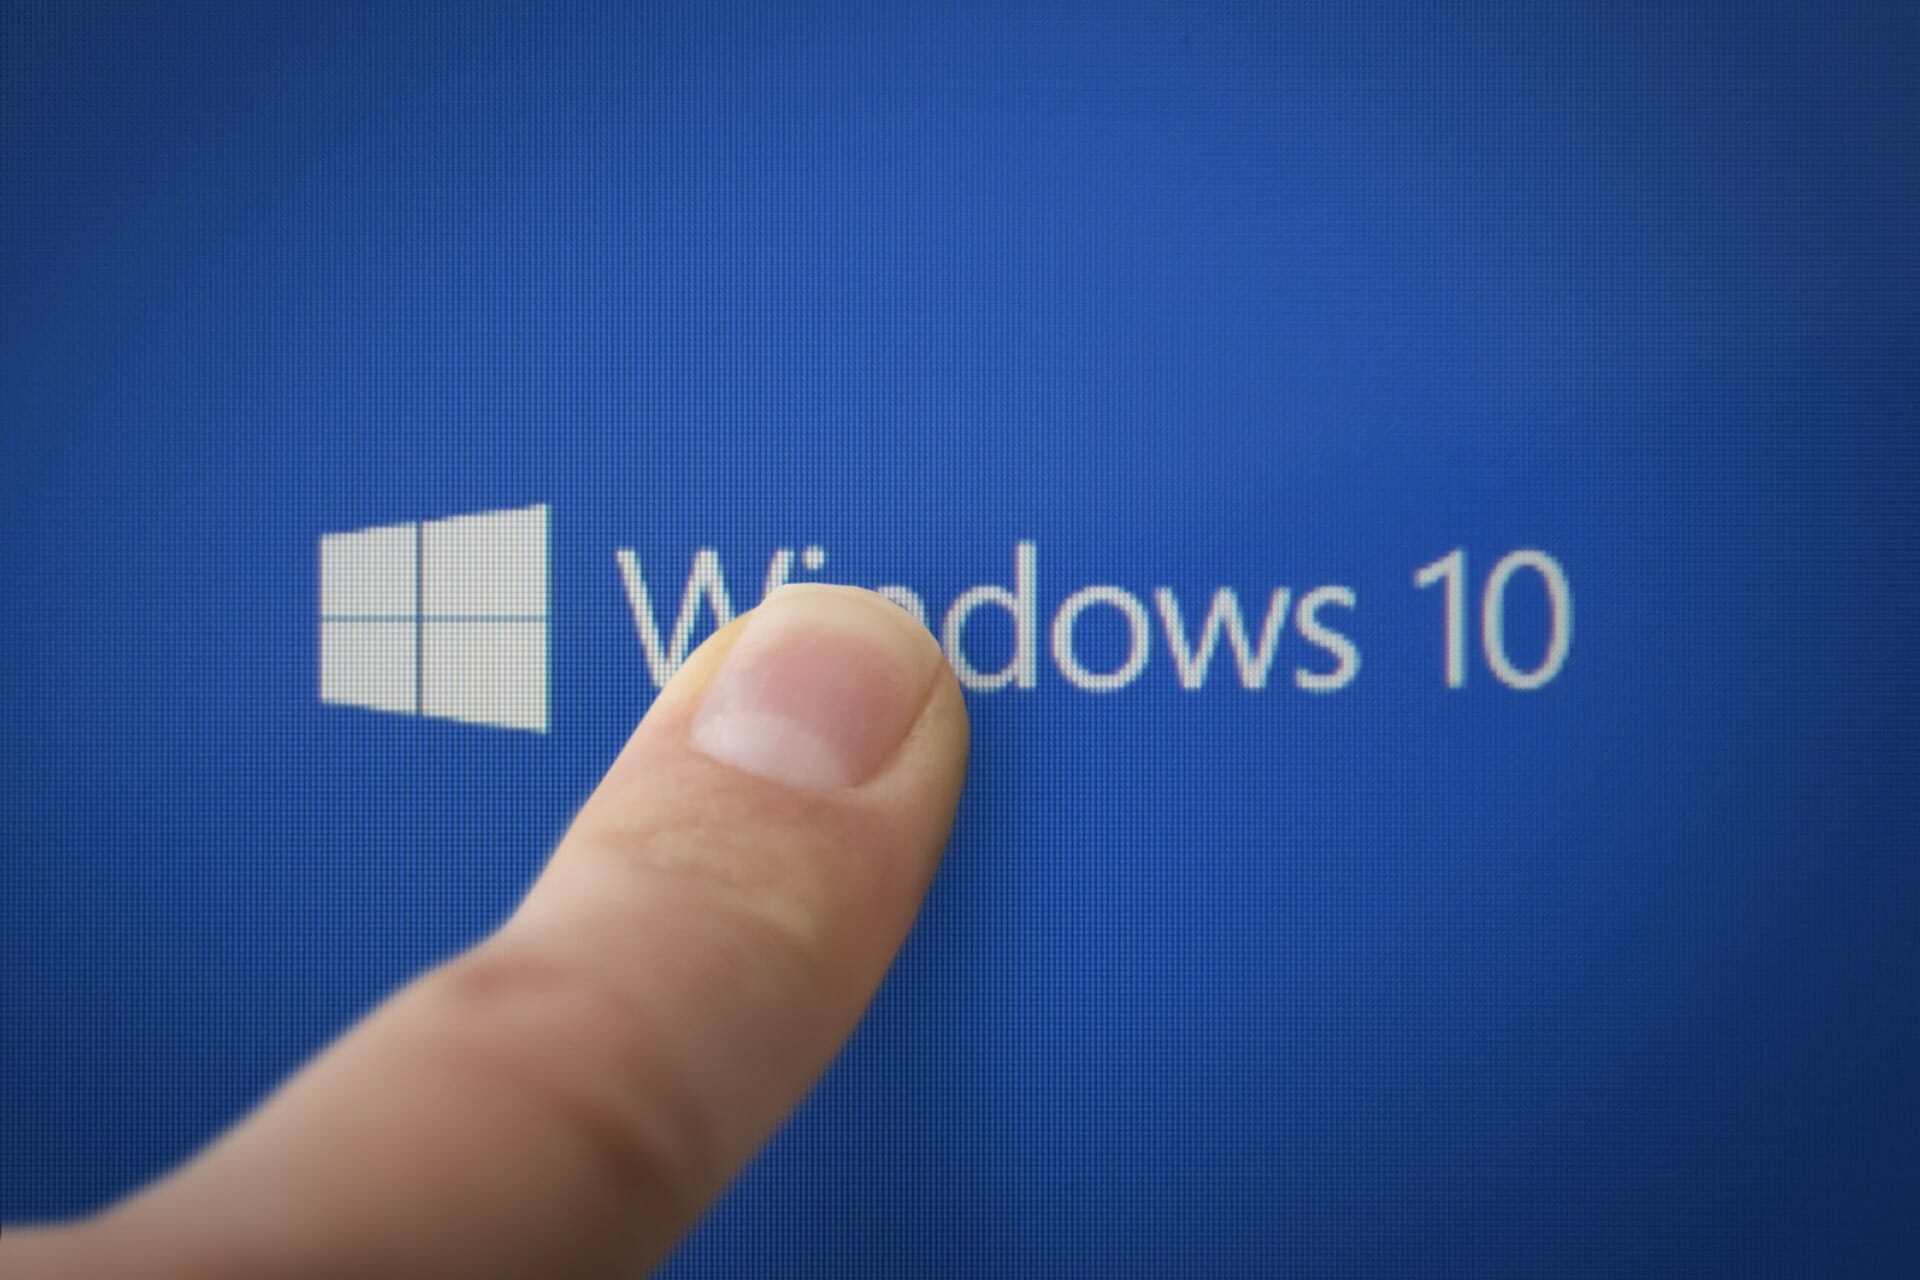 Upgrade your operating system to Windows 10